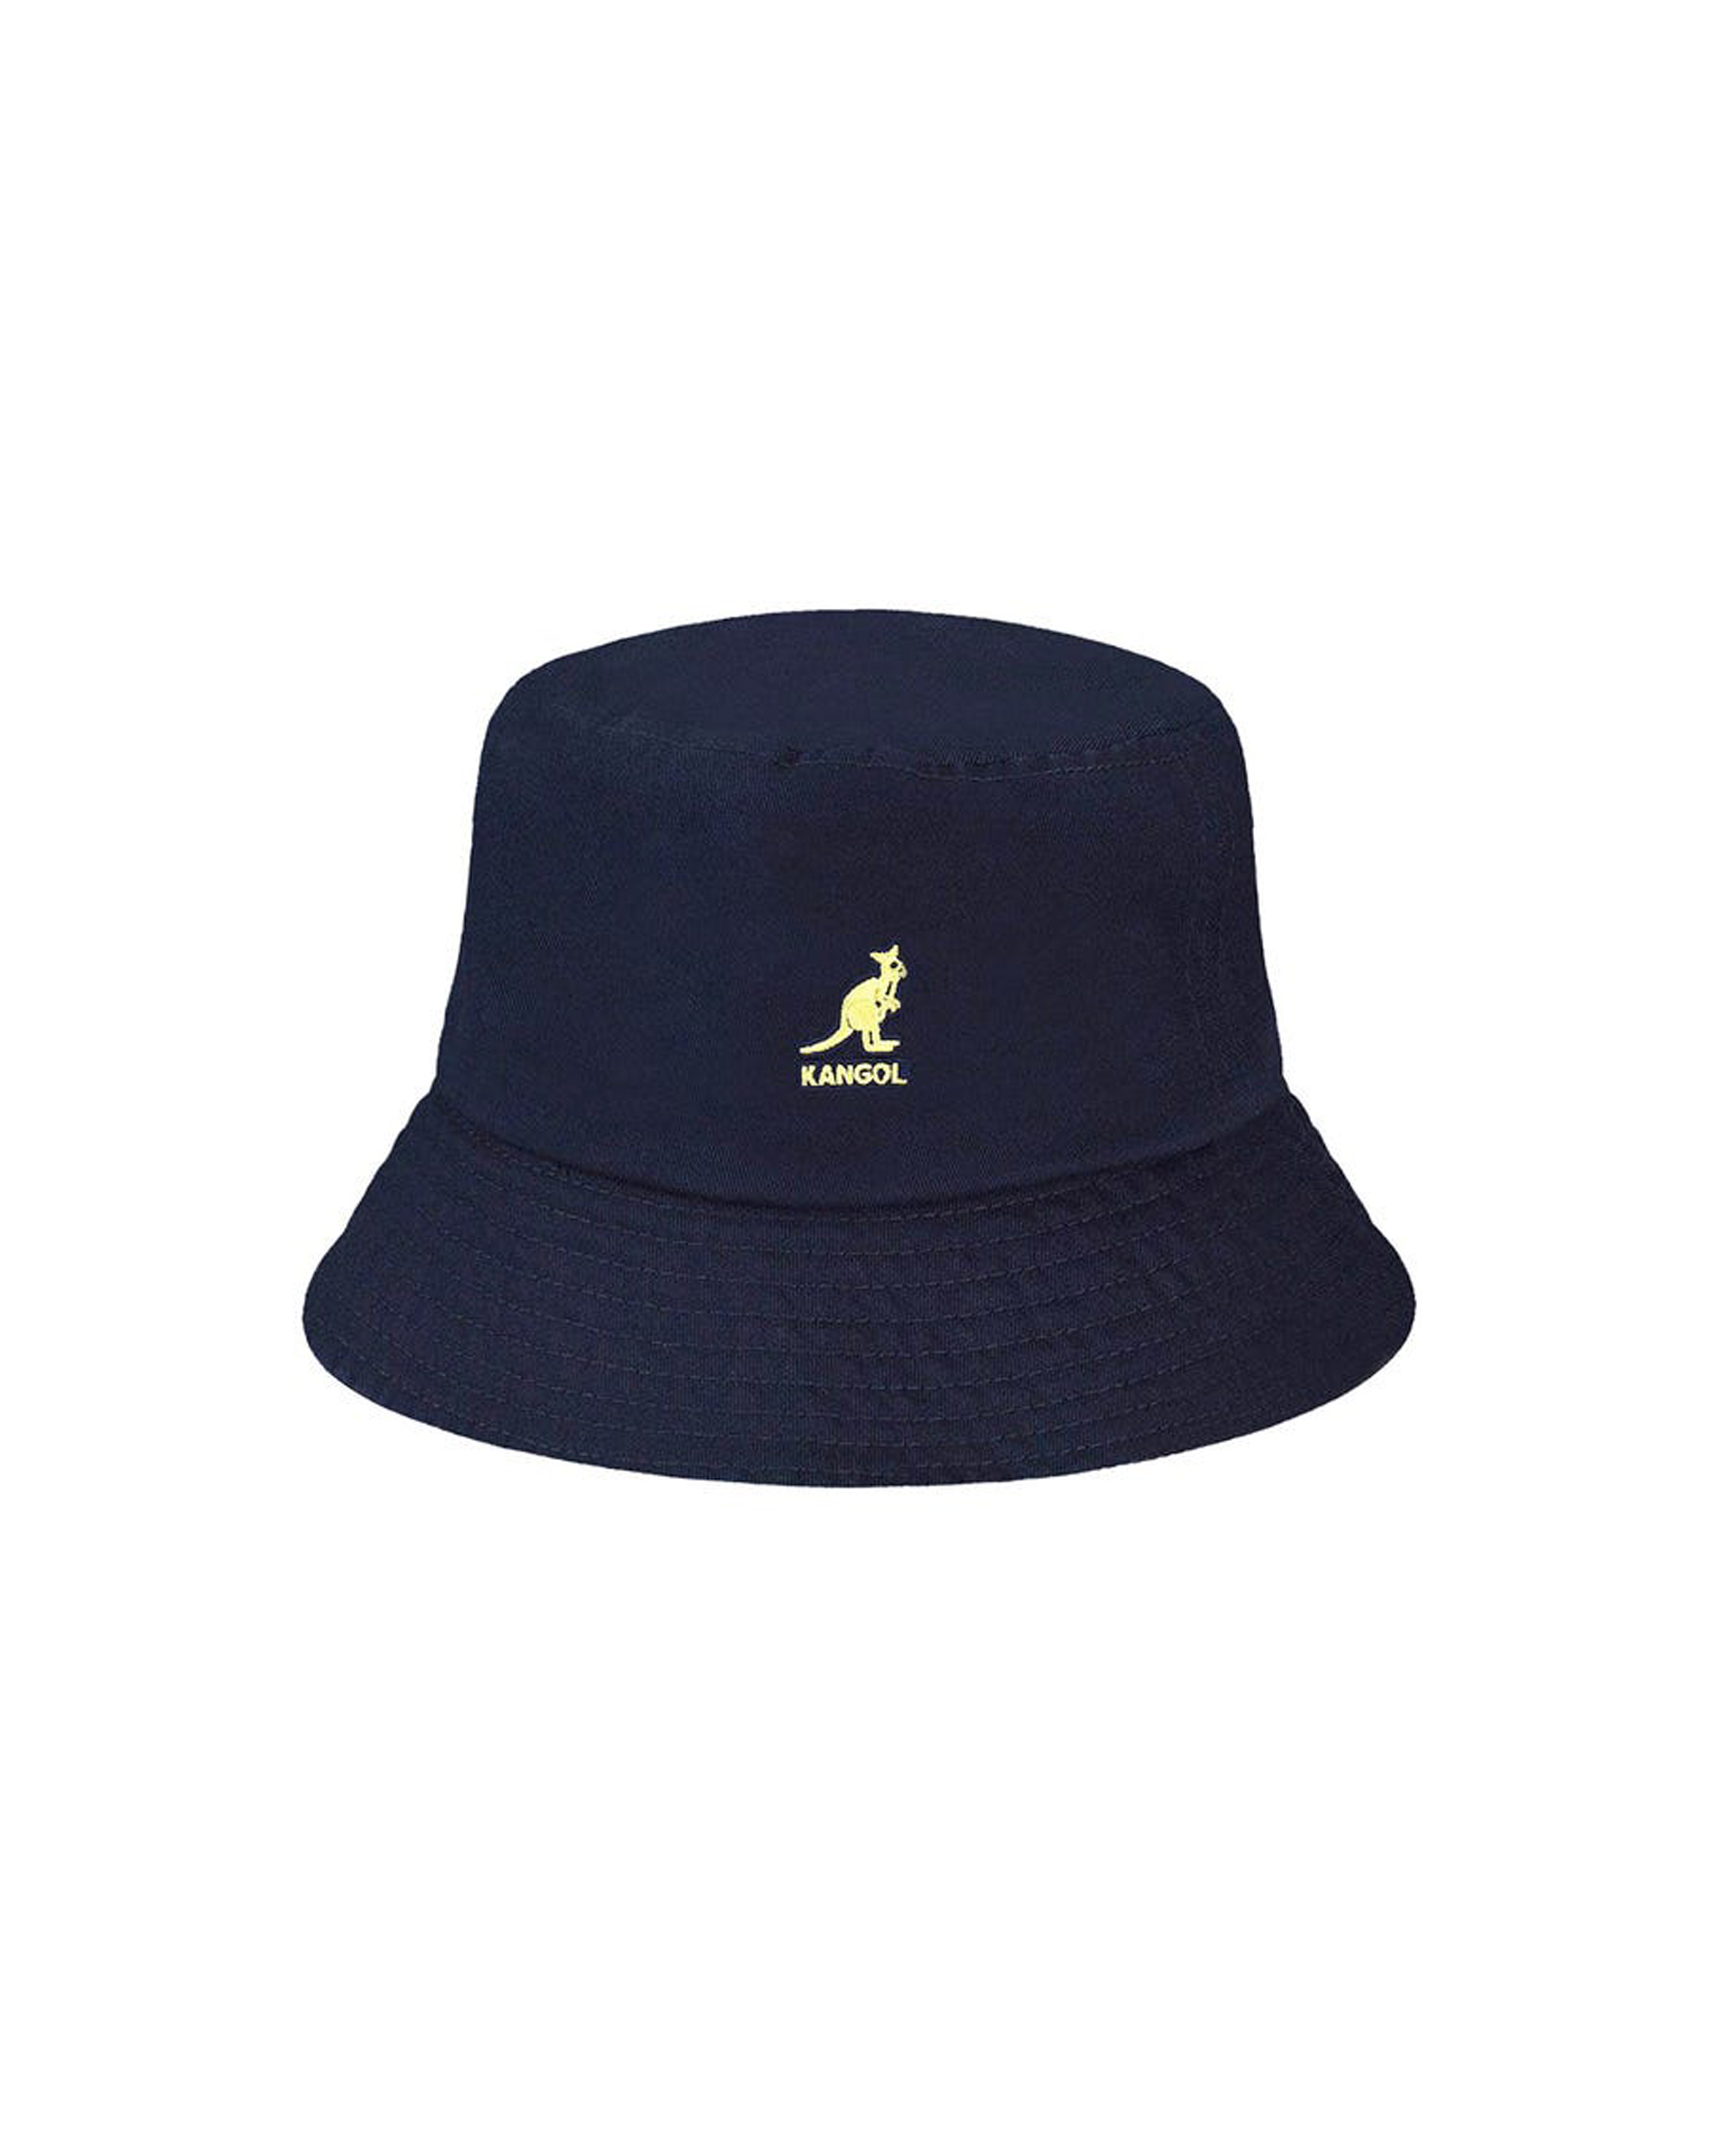 Kangol Navy Washed Bucket Hat In Nv411